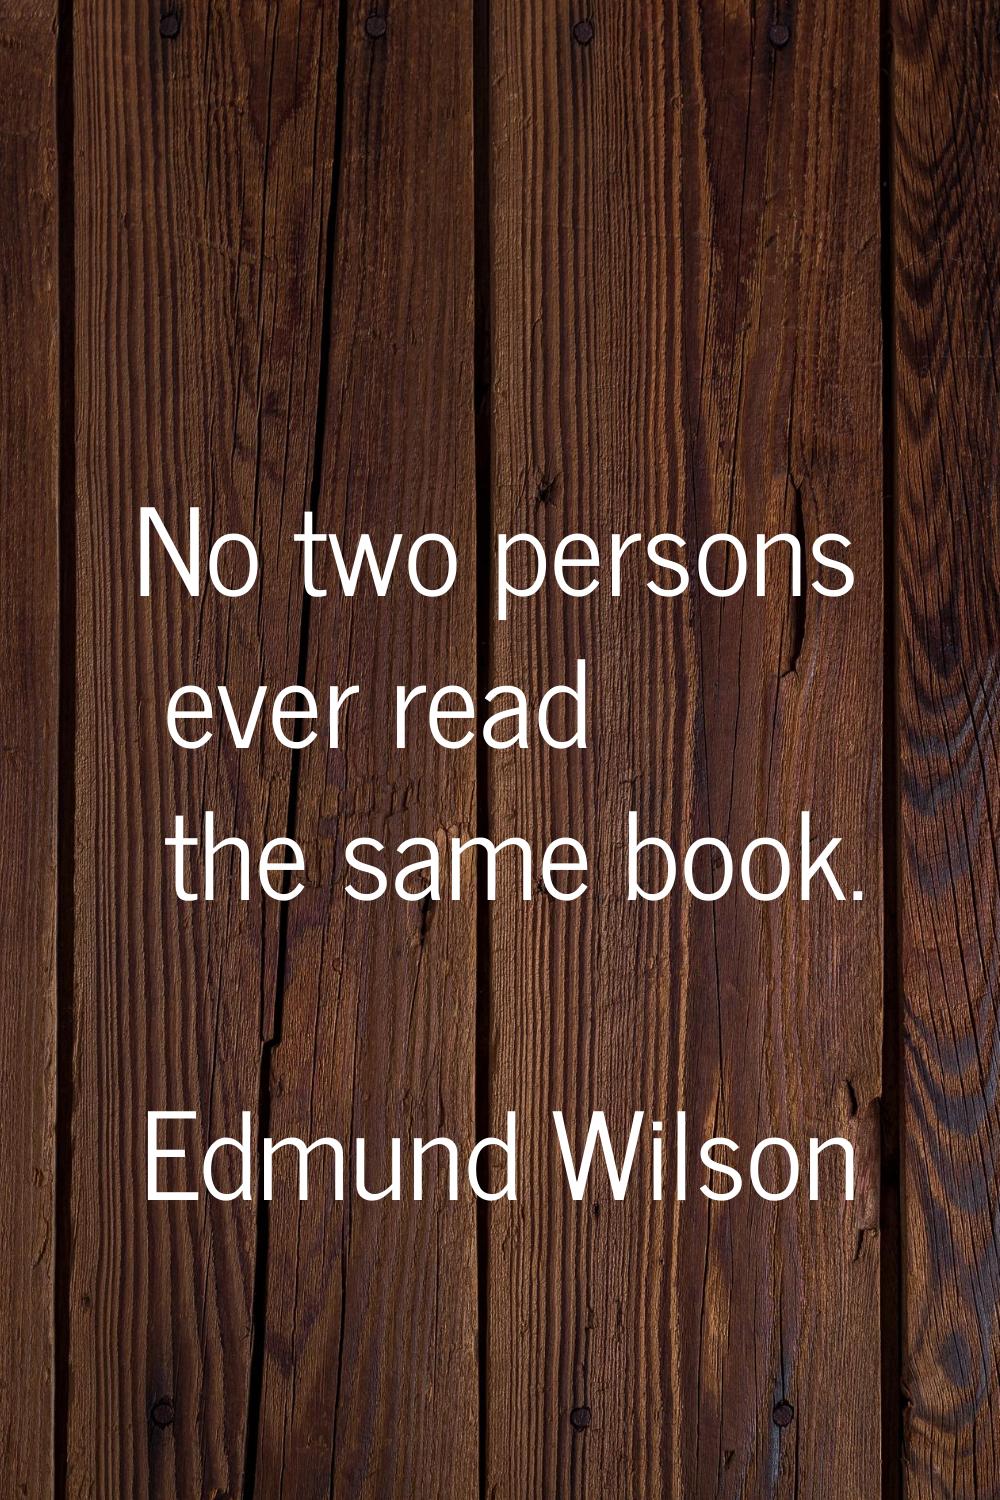 No two persons ever read the same book.